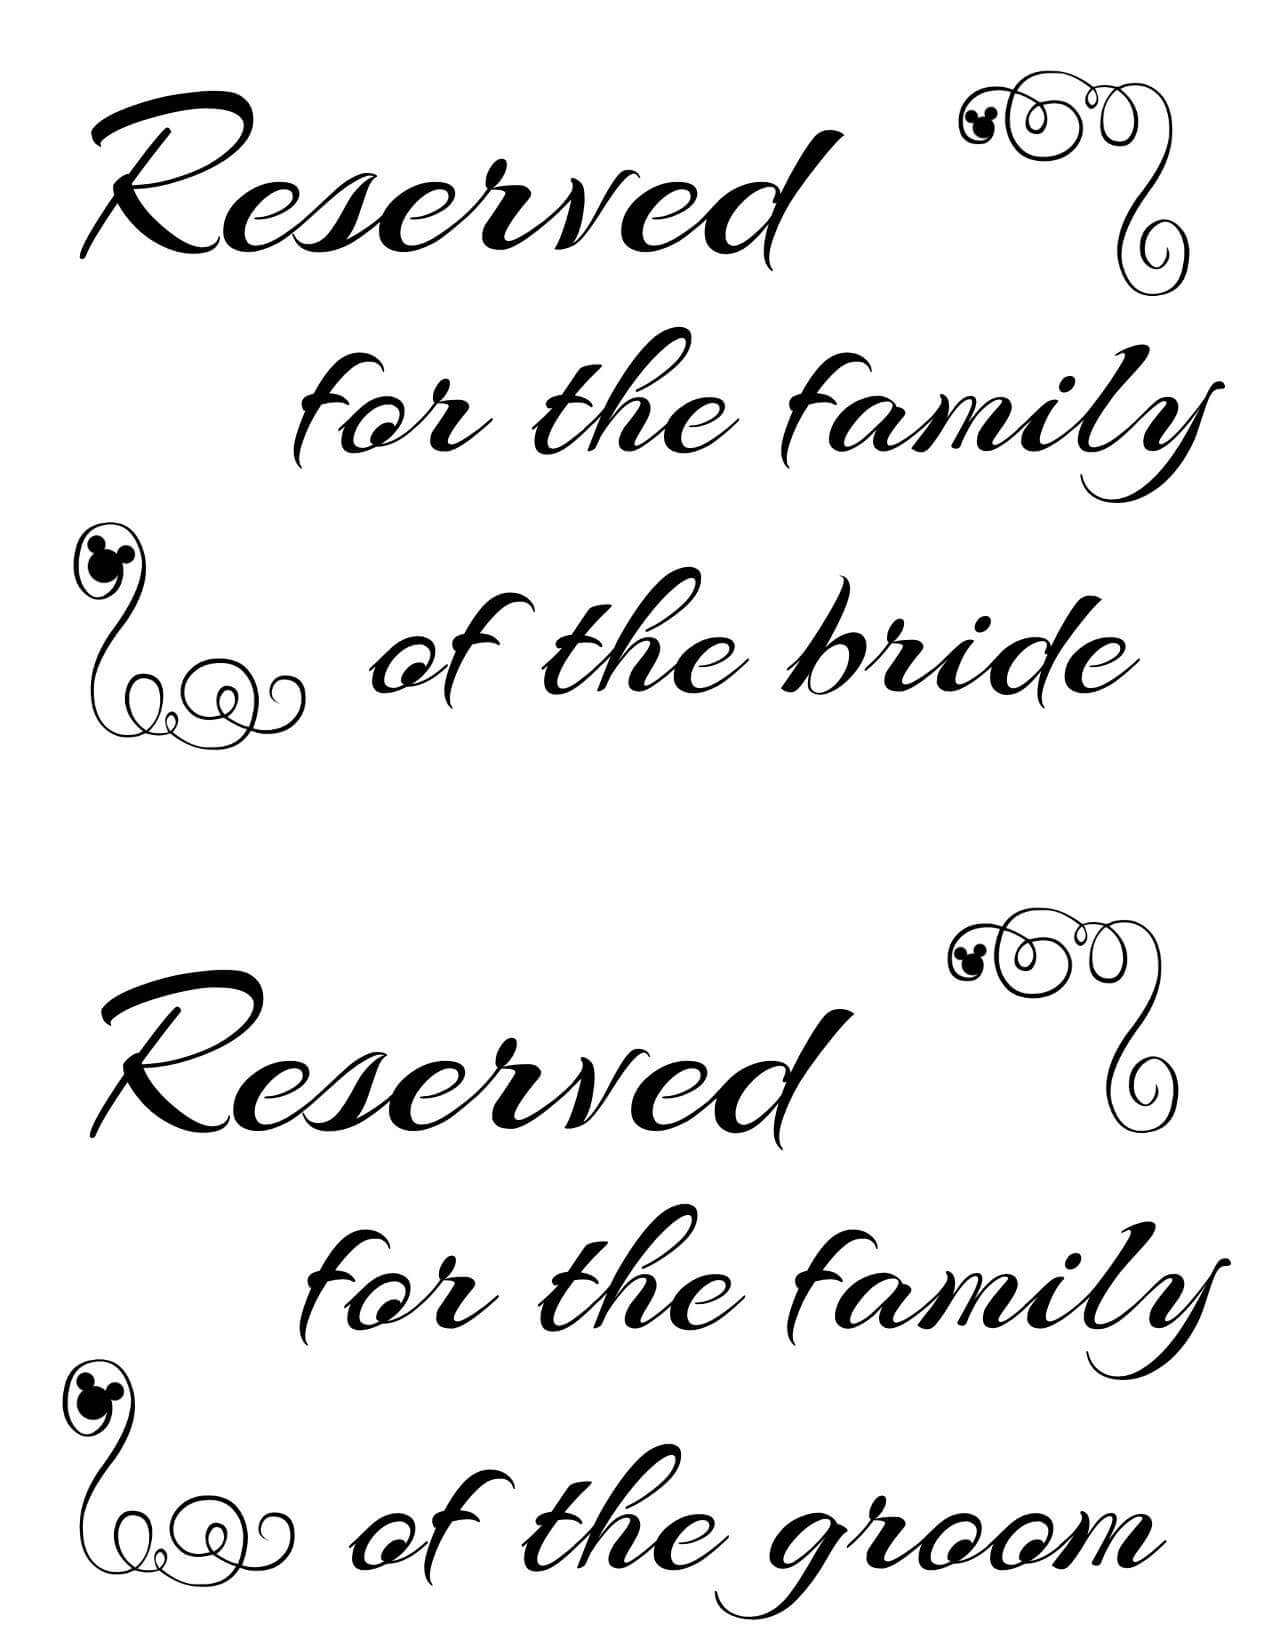 free-printable-reserved-signs-template-printable-templates